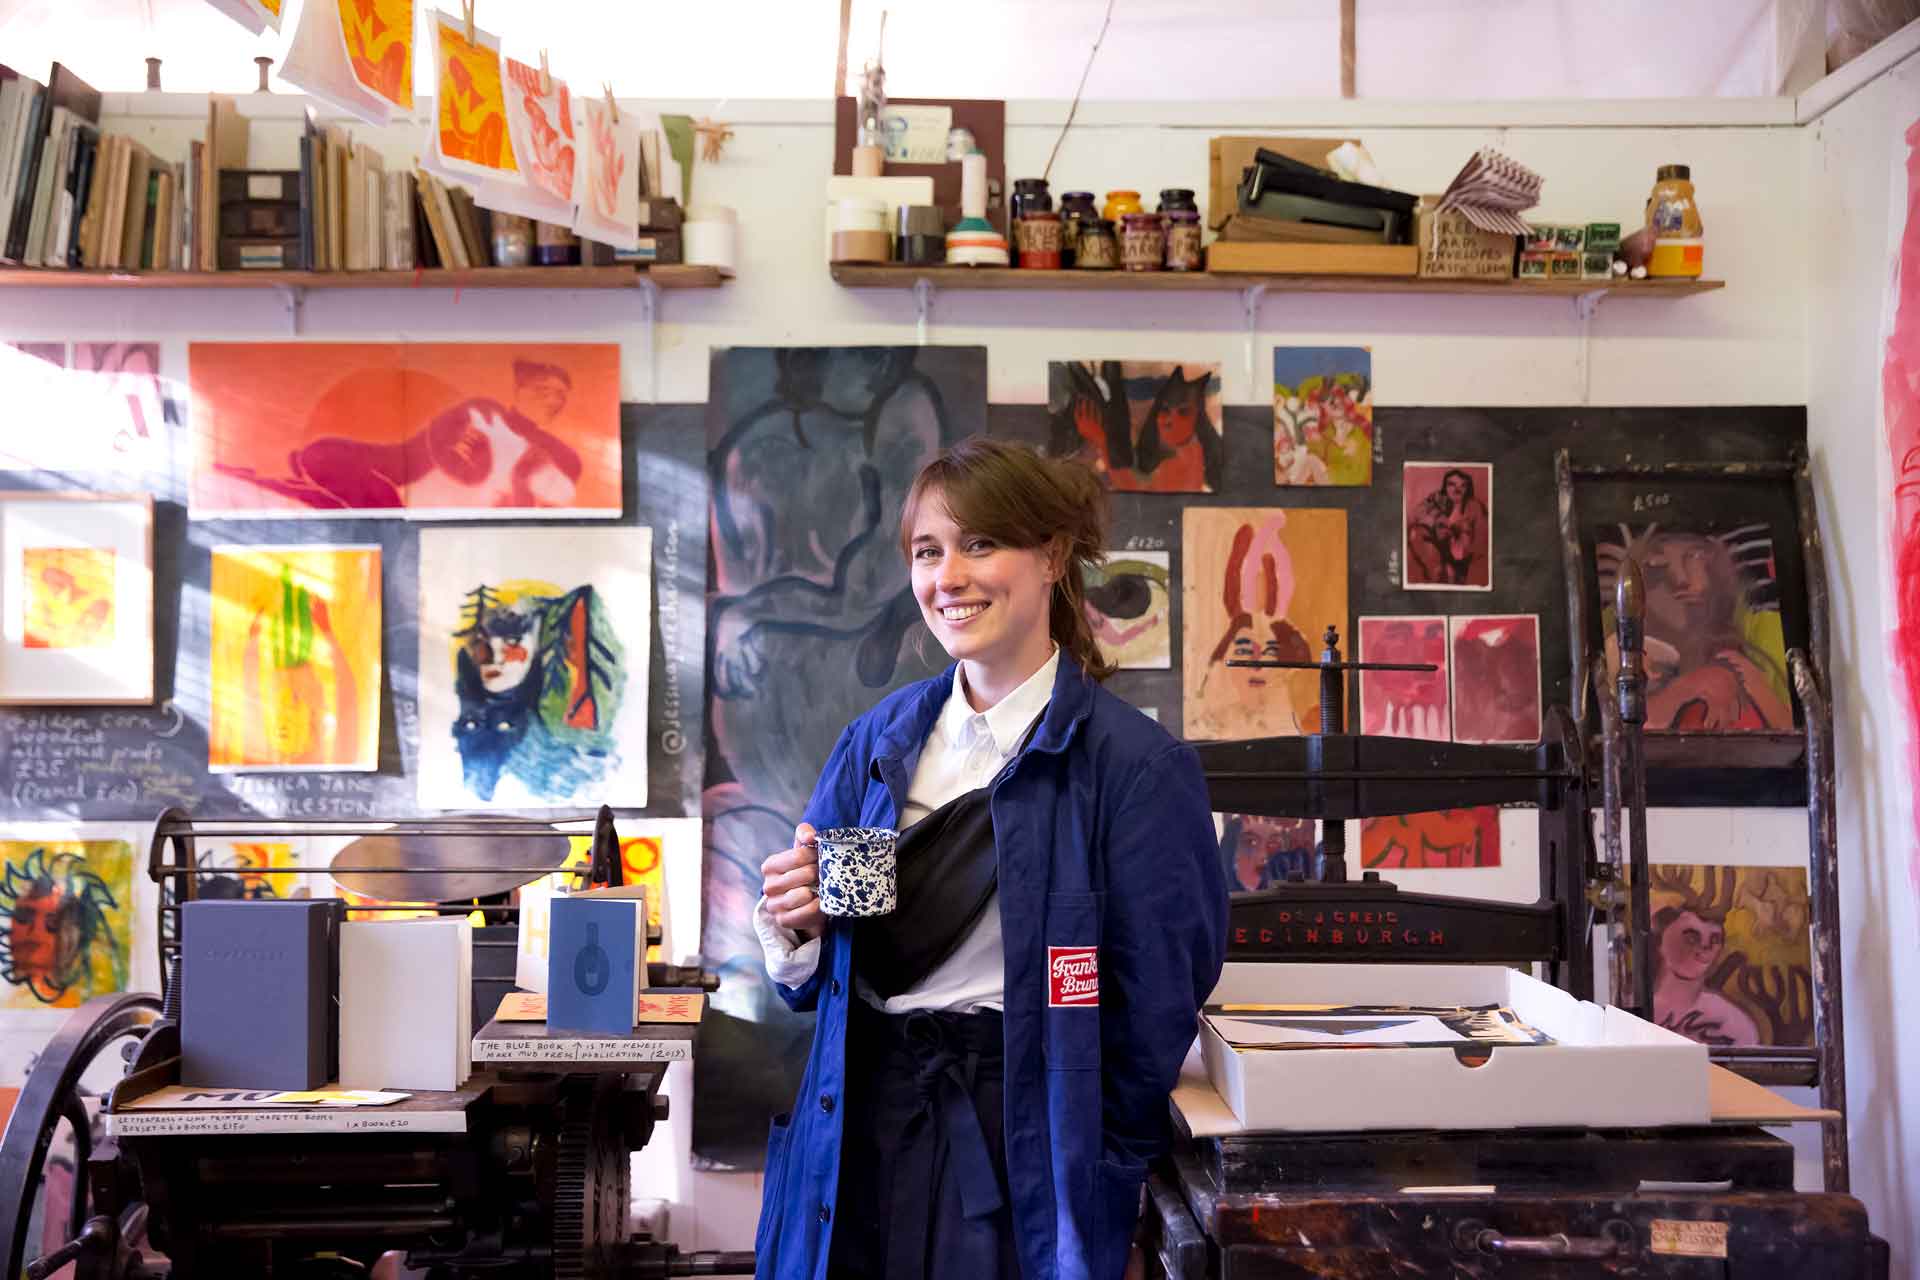 An image of an artist in their studio holding a cup of tea, with paintings behind them